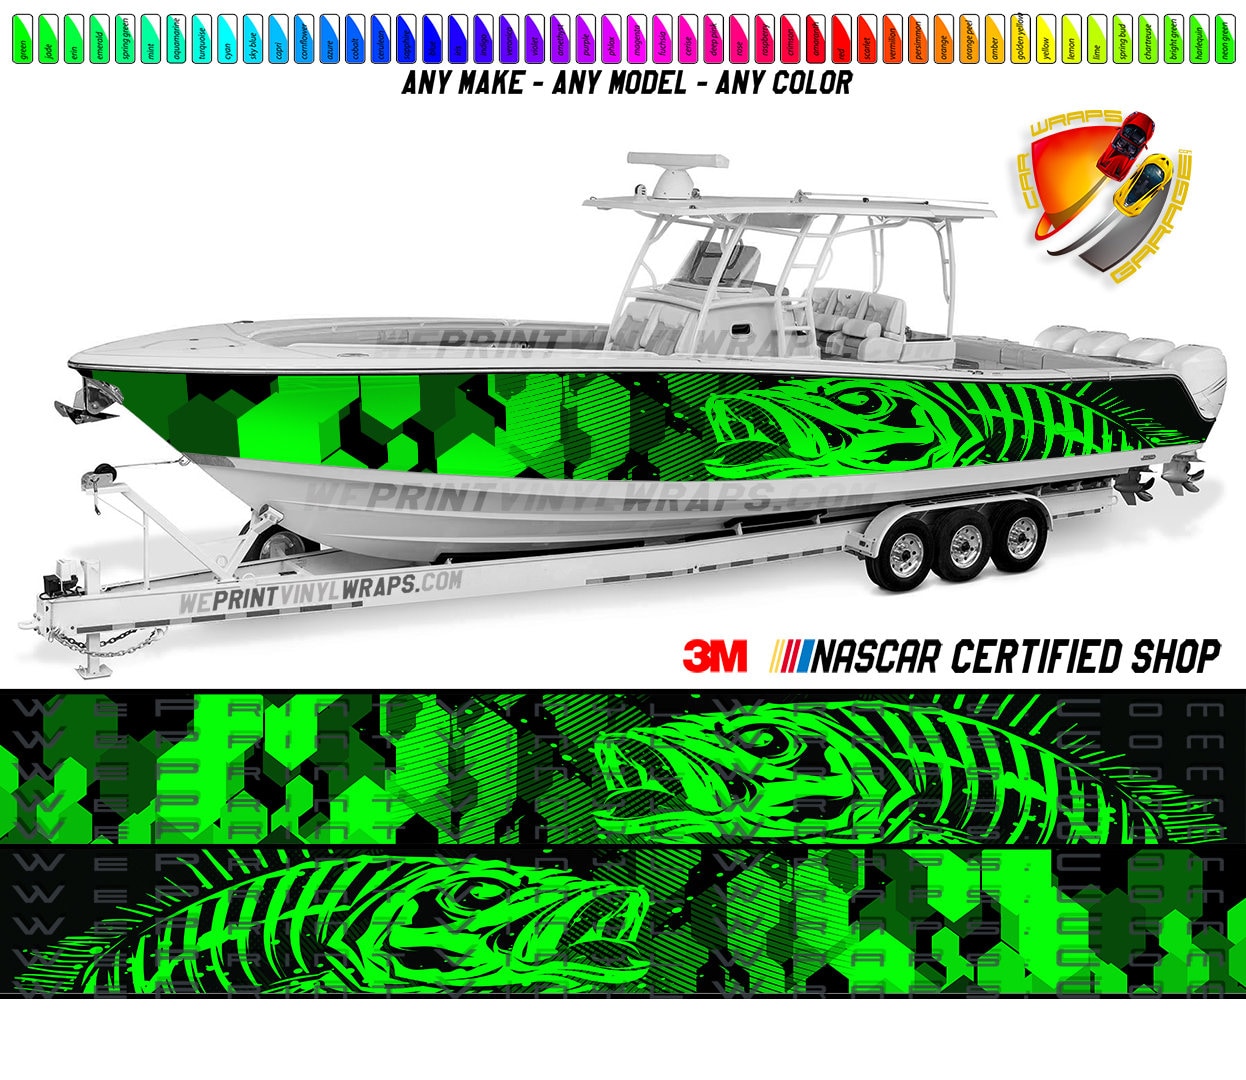 Camo Lime Green Seabass Graphic Boat Vinyl Wrap Decal Fishing Bass Pontoon  Decal Bowriders Deck Watercraft Etc.. Boat Wrap Decal 